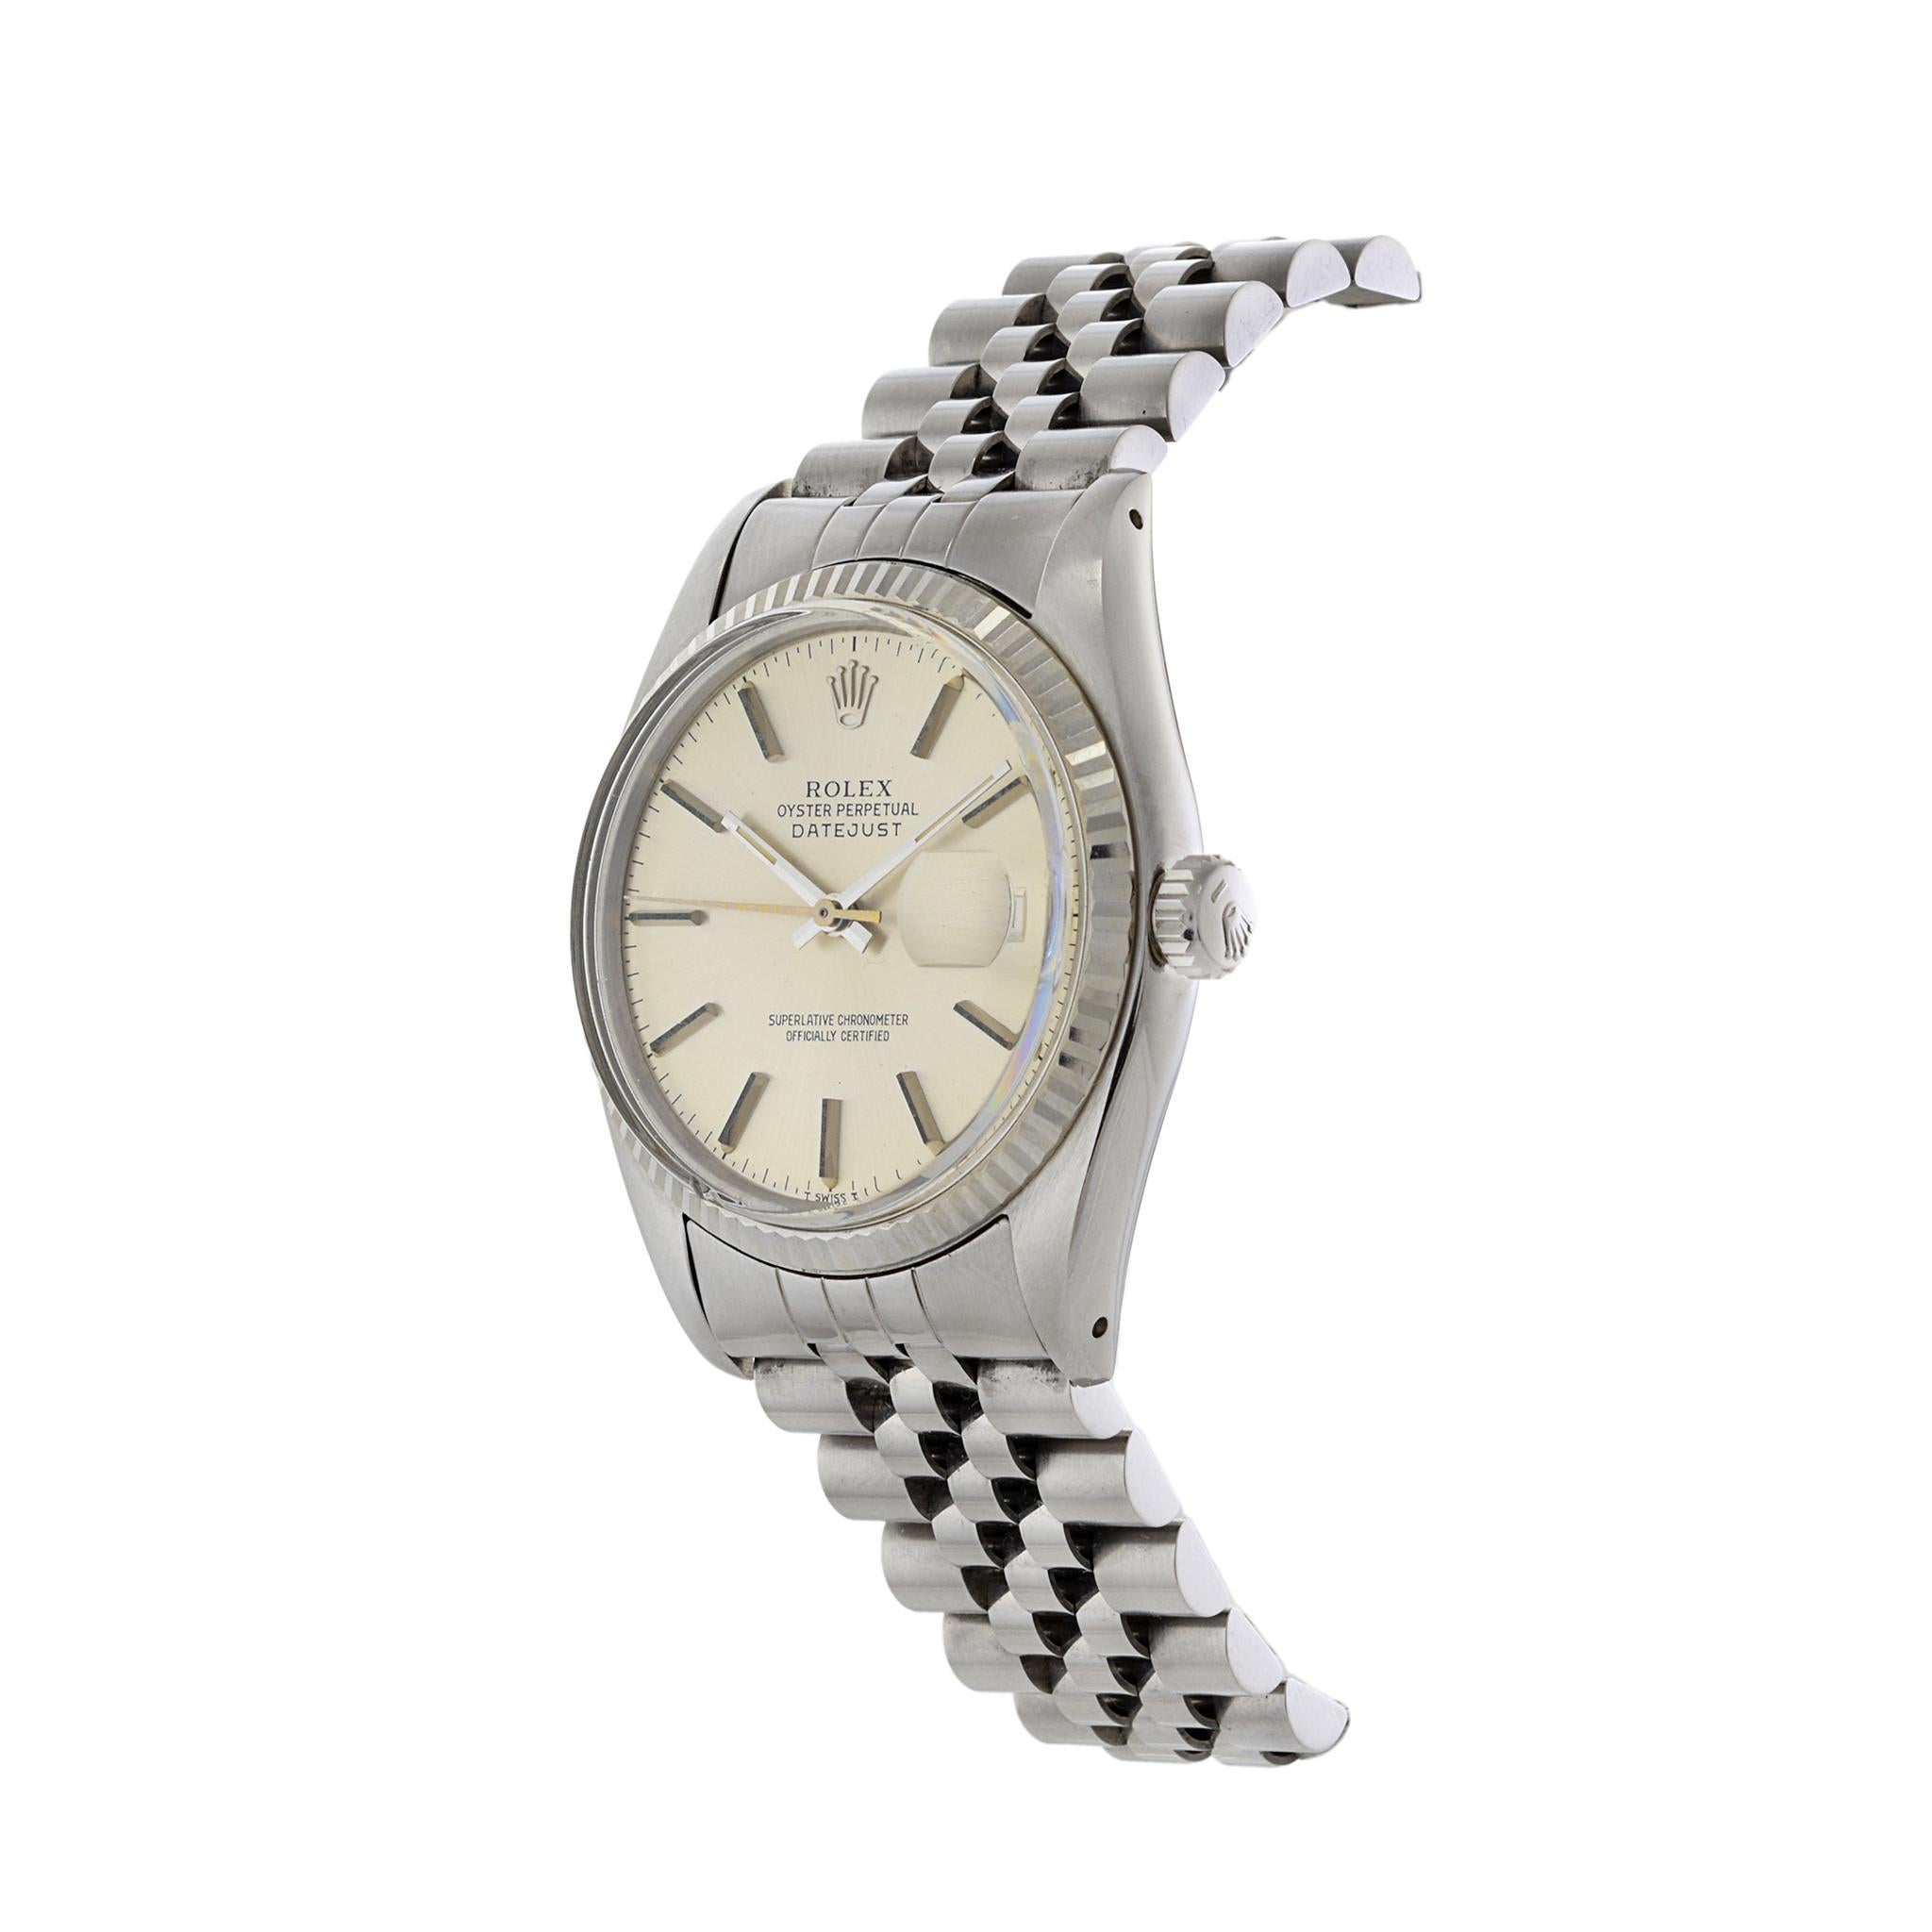 Retro Rolex Datejust 36 Quickset Reference 16014 For Sale